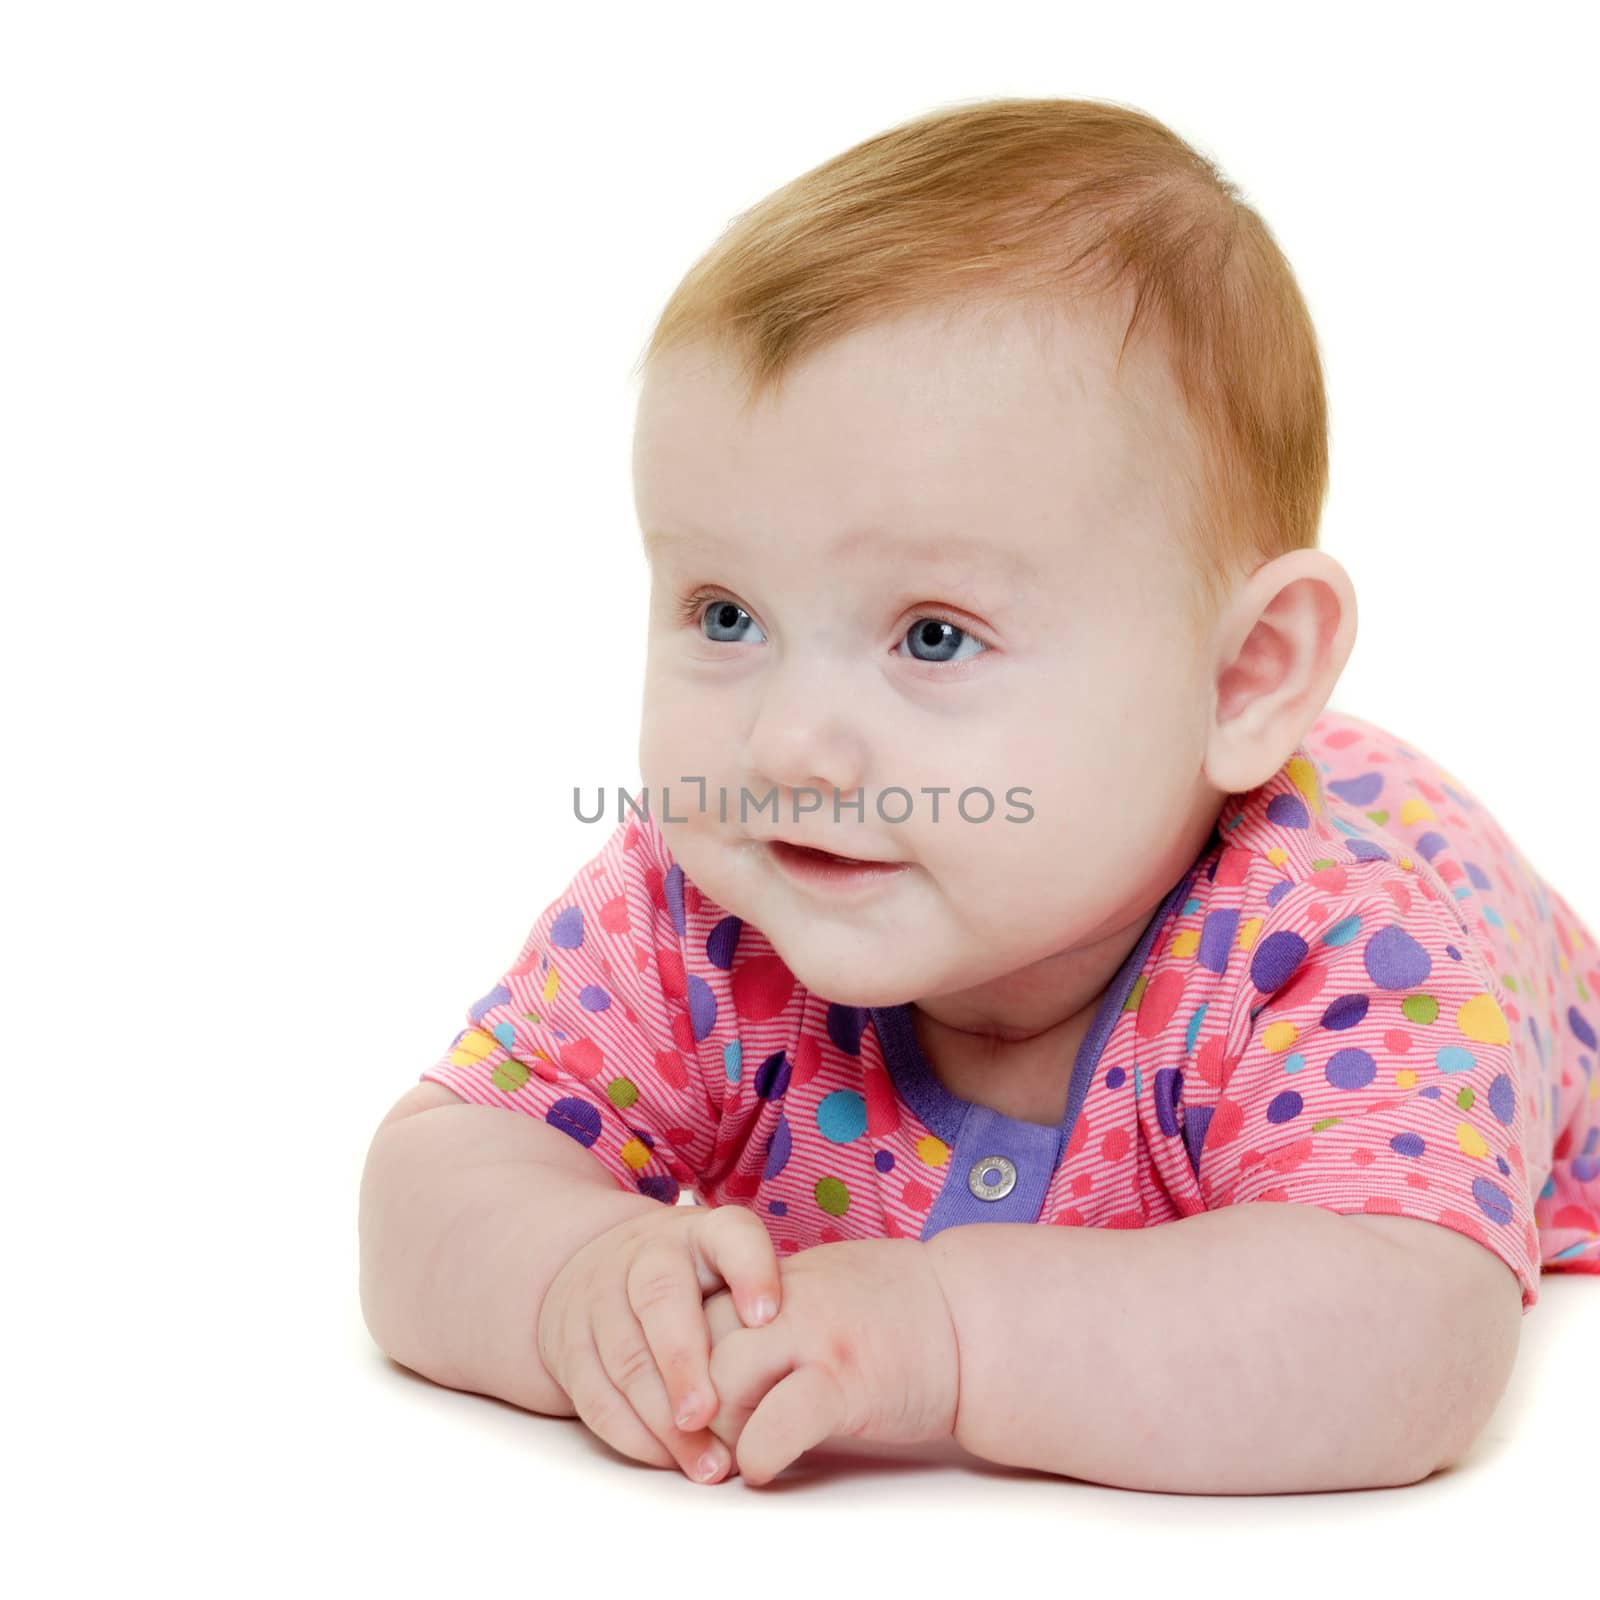 A sweet happy baby 3 month young. Resting on af white background.